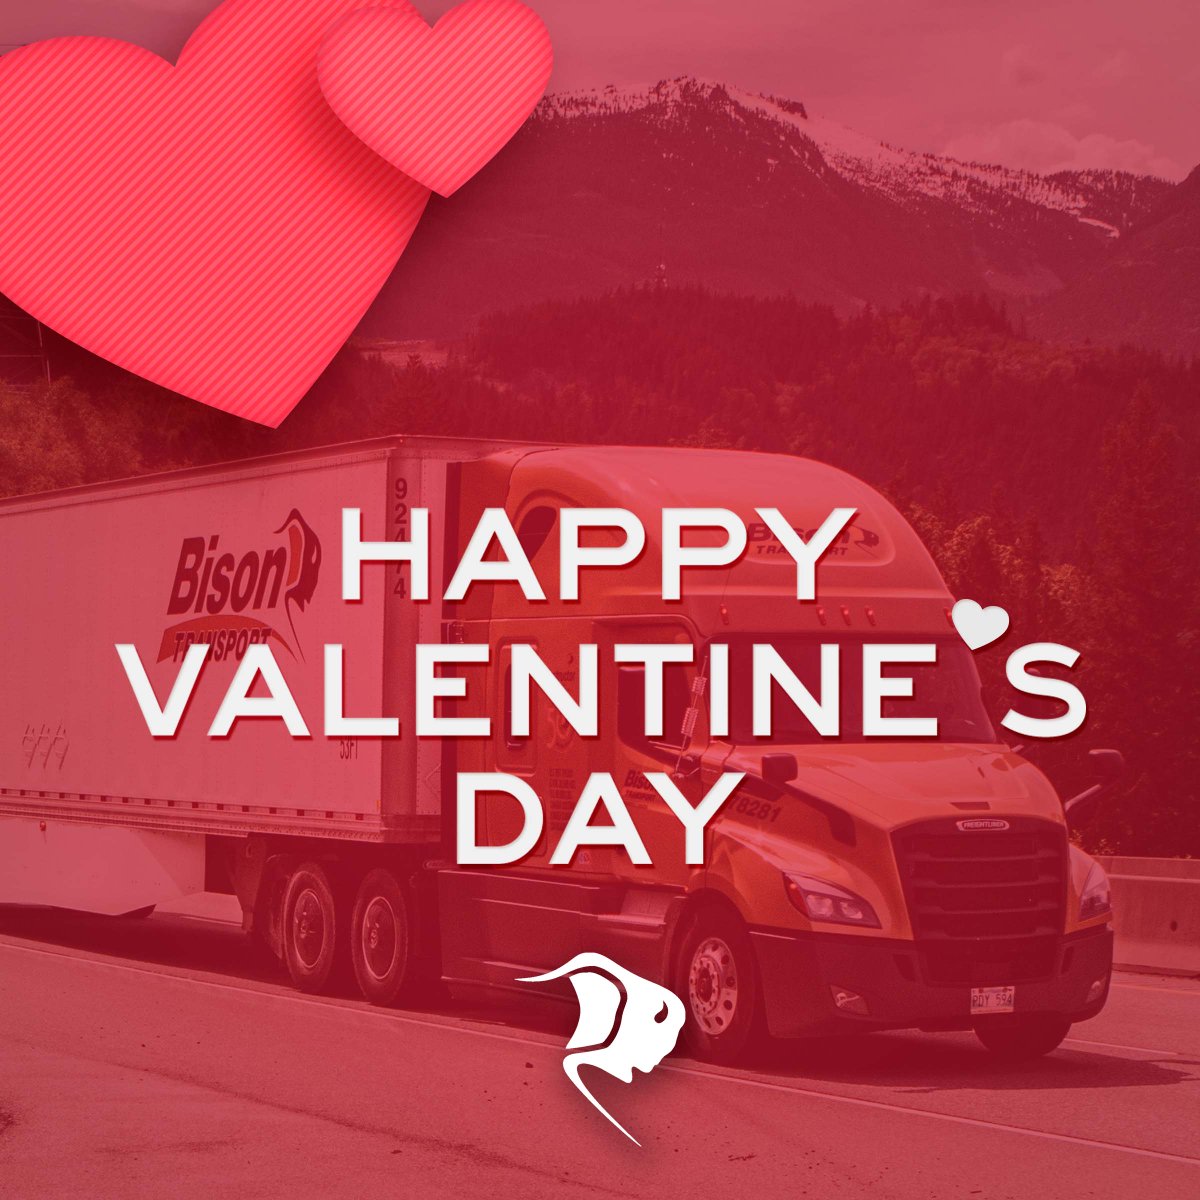 Happy Valentine’s Day to our dedicated Drivers, Staff, Customers, Partner Carriers! Each of you plays a vital role in our business. We appreciate every one of you. Do you feel the love?! #ValentinesDay #ThankYou #WeLoveTrucking